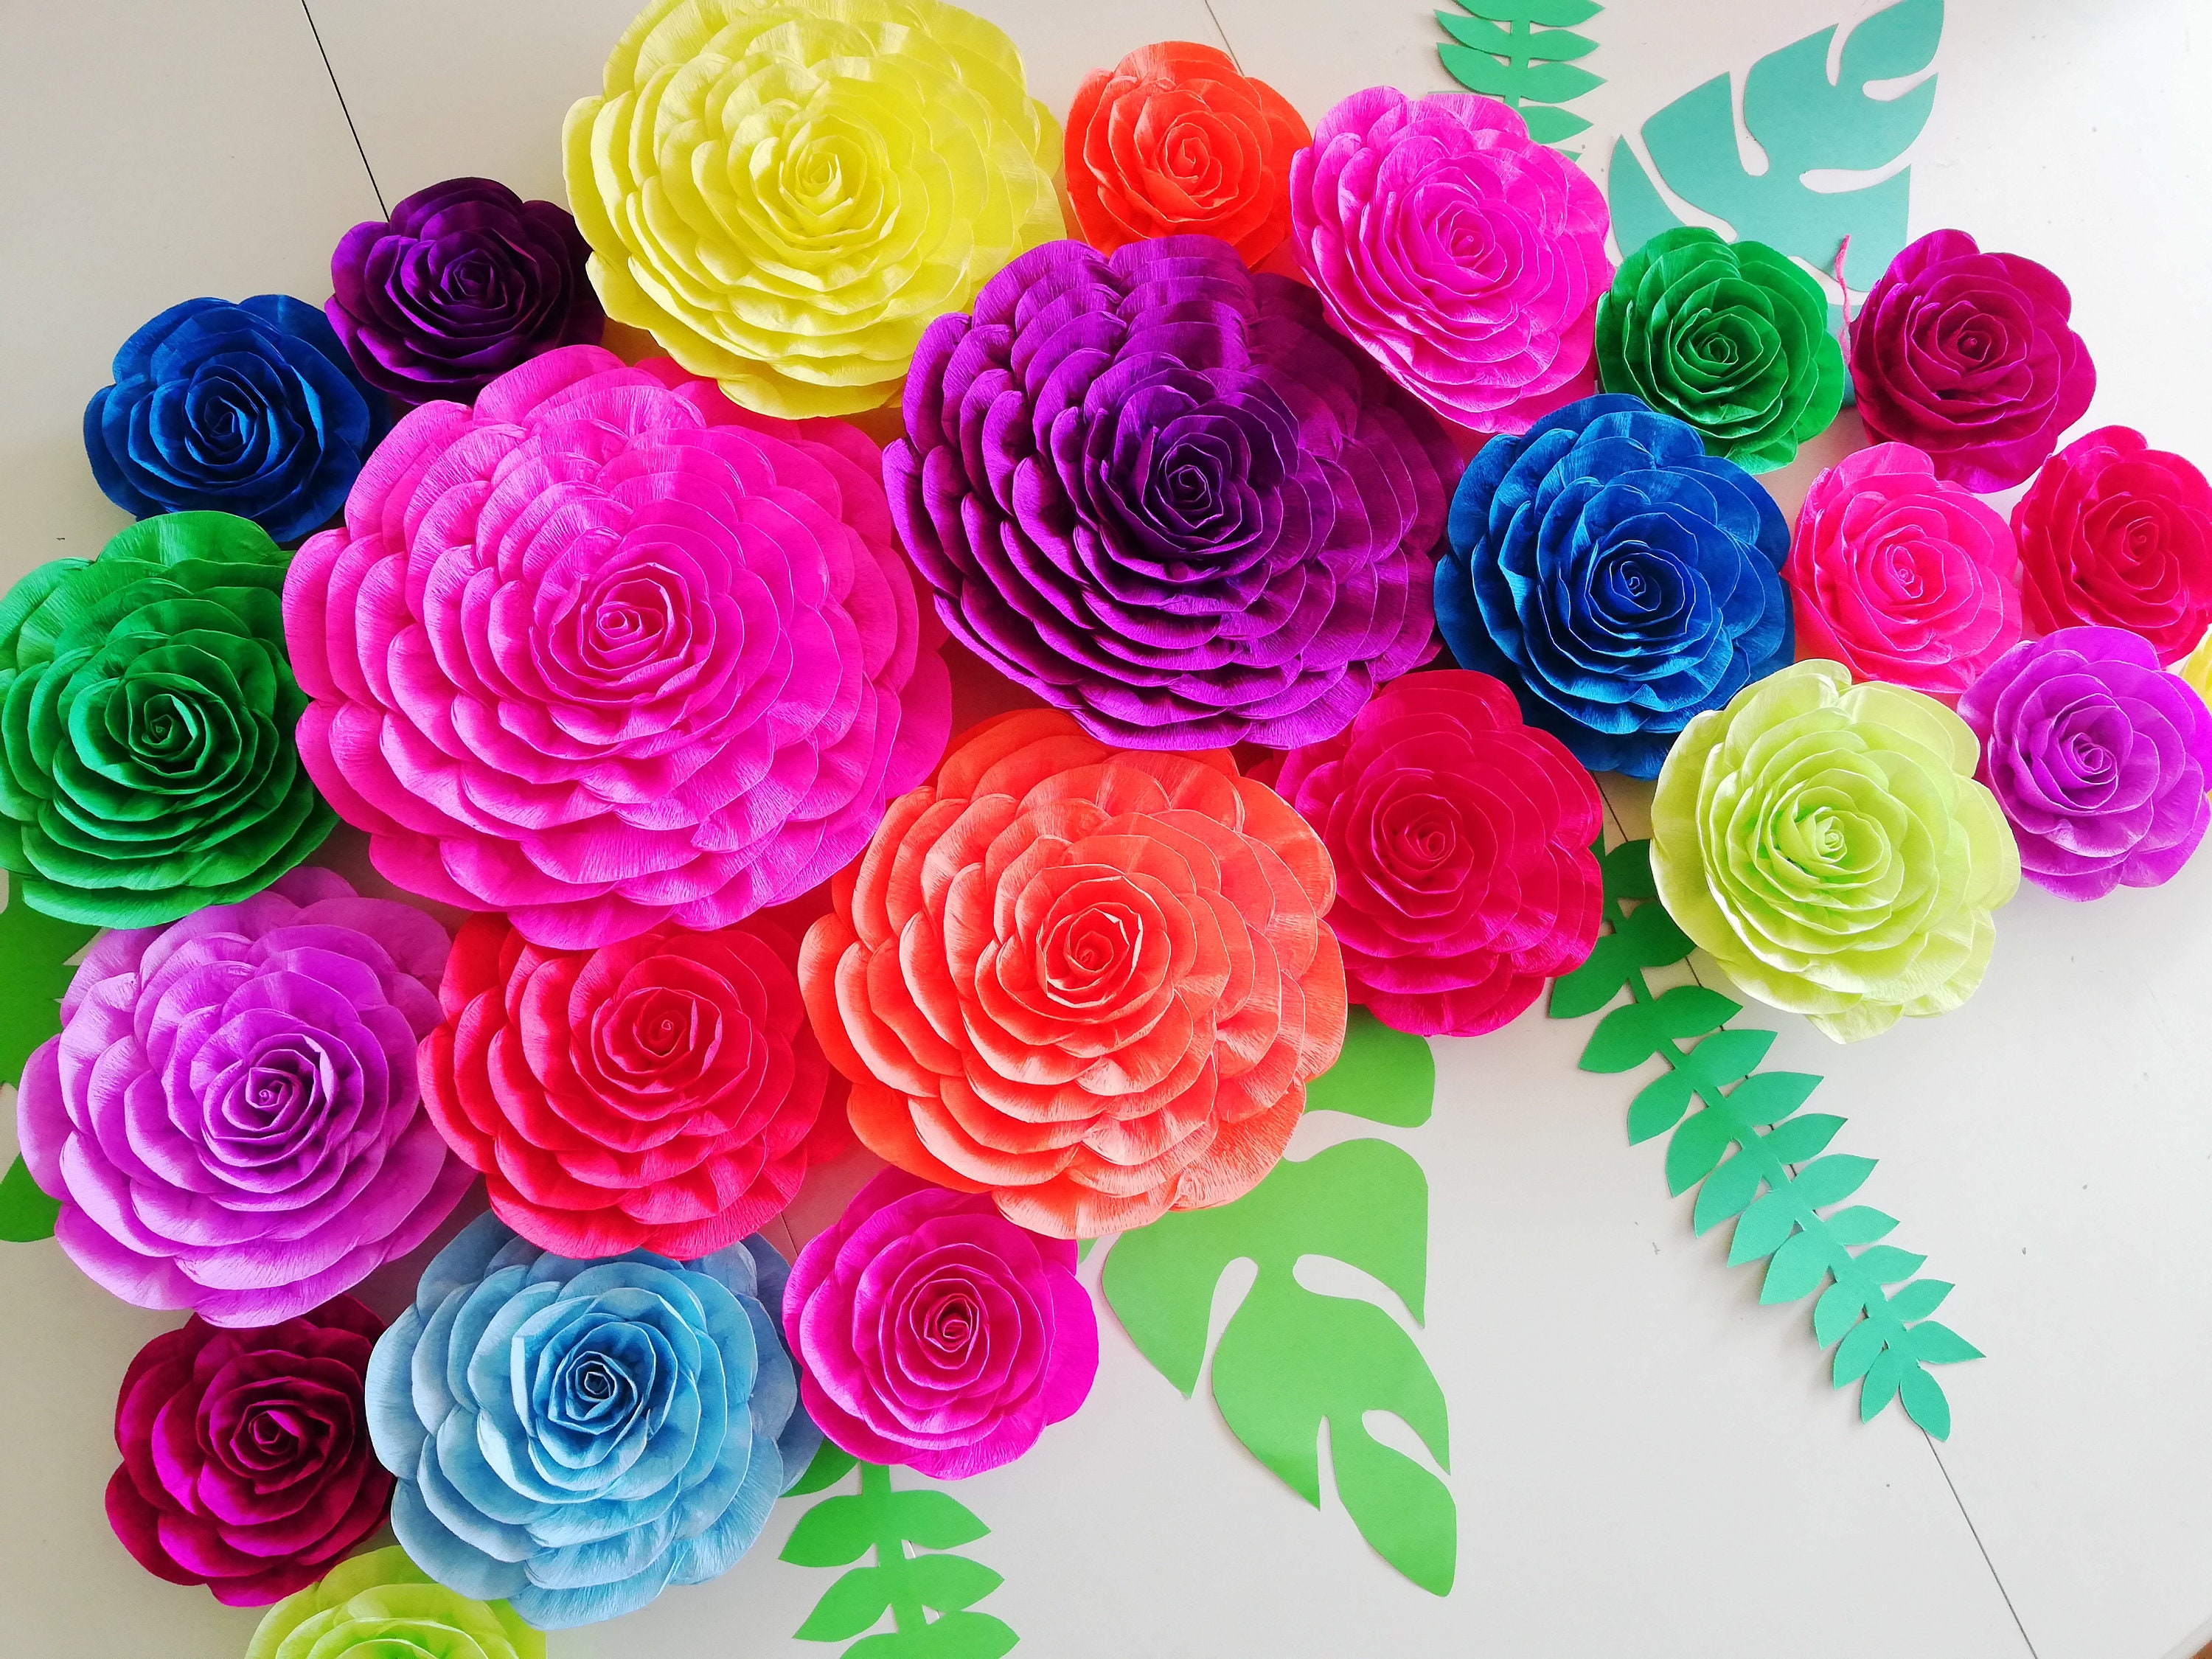 Rainbows & Lilies Paper Flowers Decorations for Wall - 3-Set Bundle for  Wedding, Bridal Shower, Baby Girl Nursery Decor, Flower Backdrop